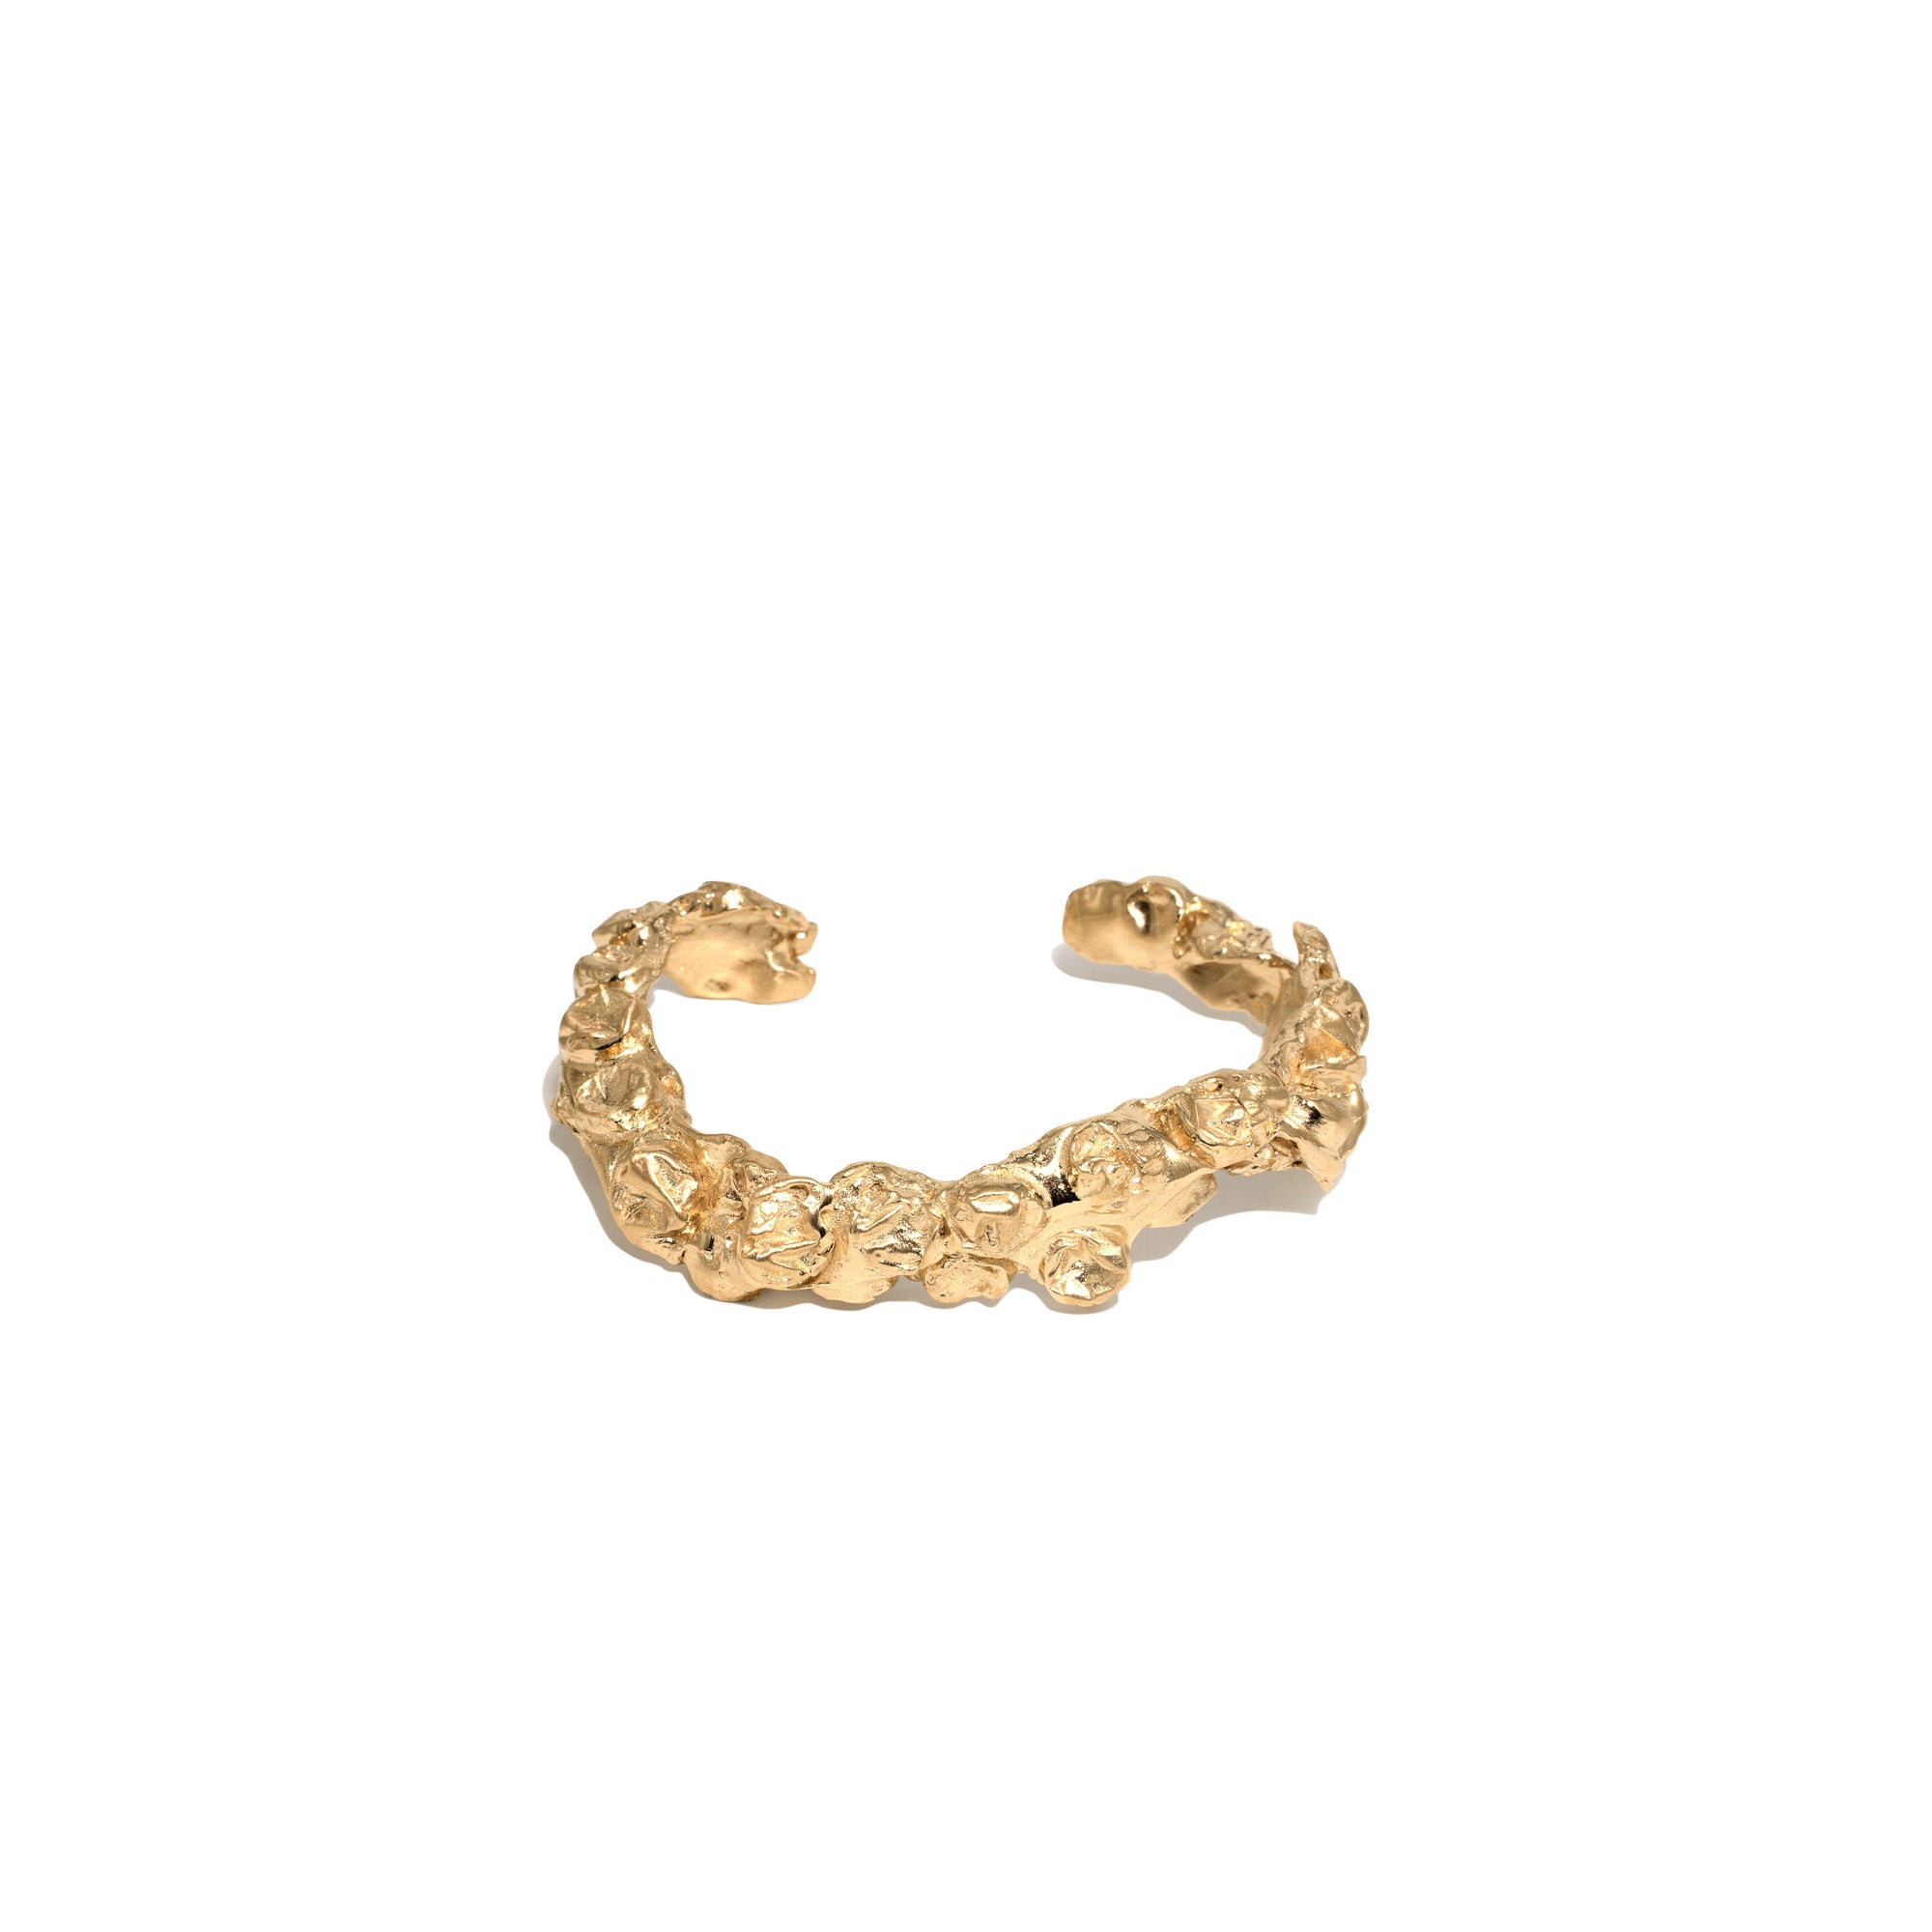 Completedworks - The Bubble To End All Bubbles Bracelet - (Gold) view 1